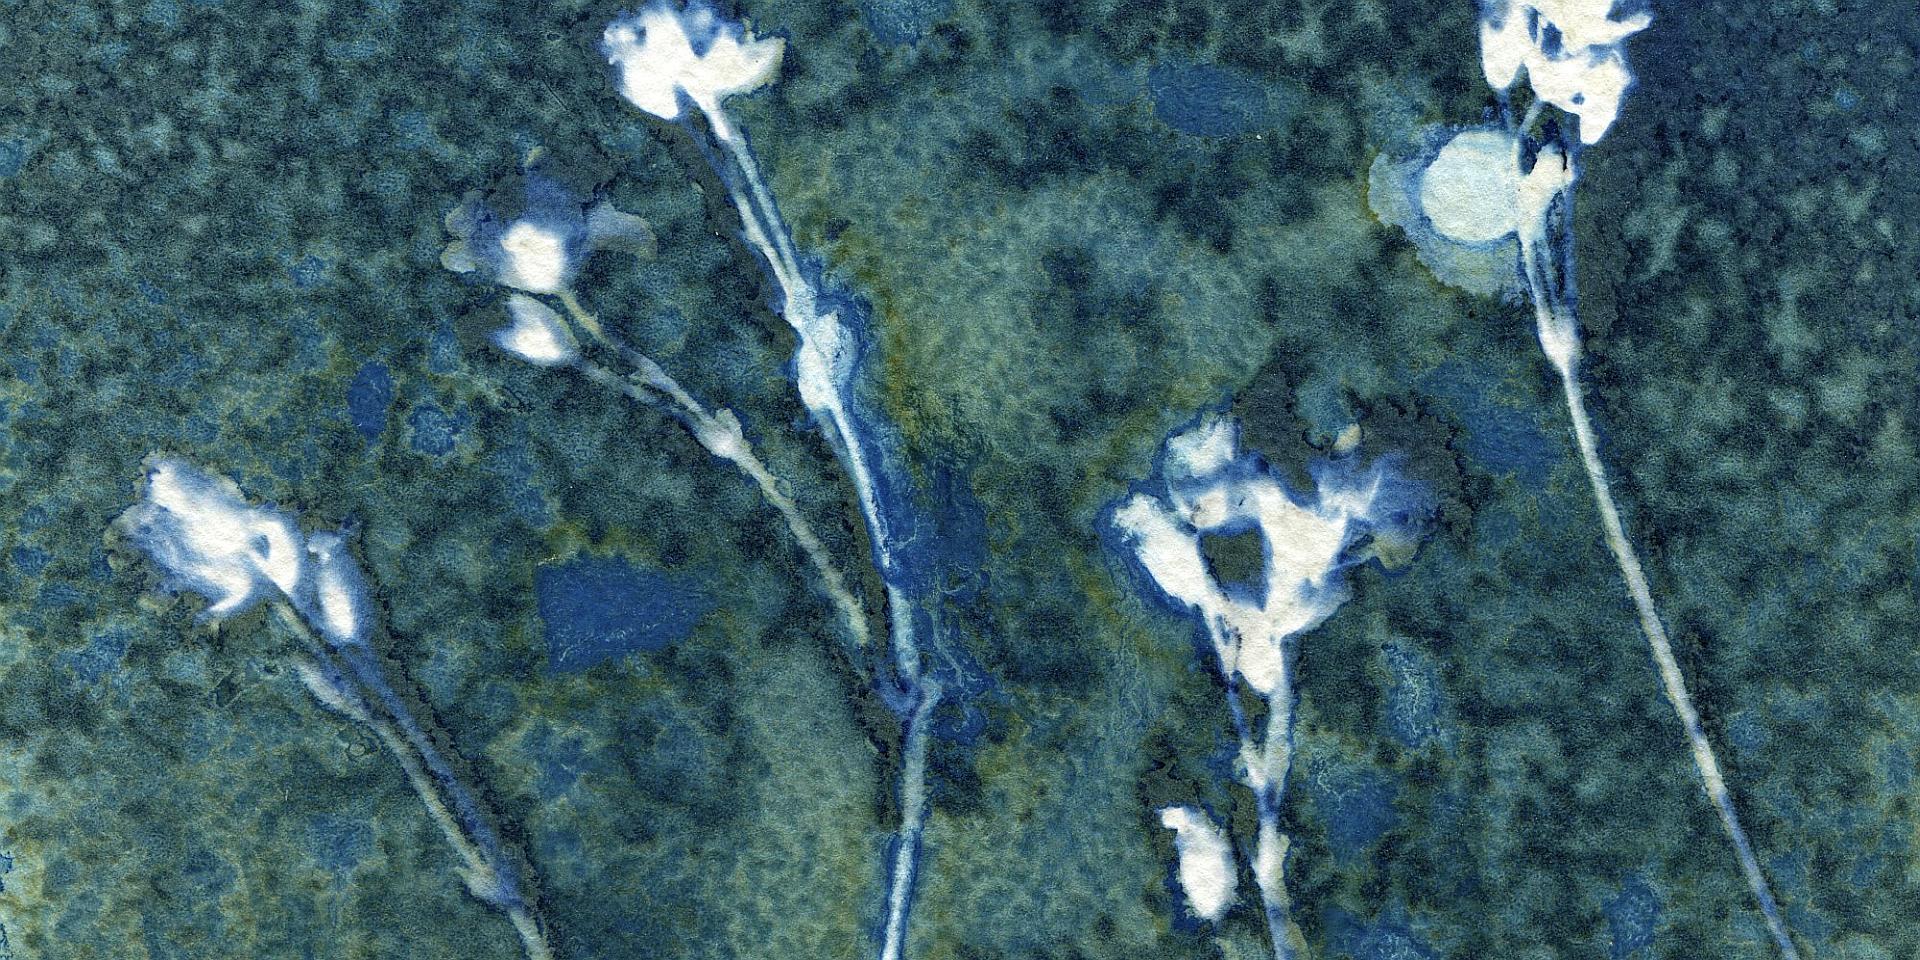 A fragment of wet cyanotype process pring from "Magical Meadows" series